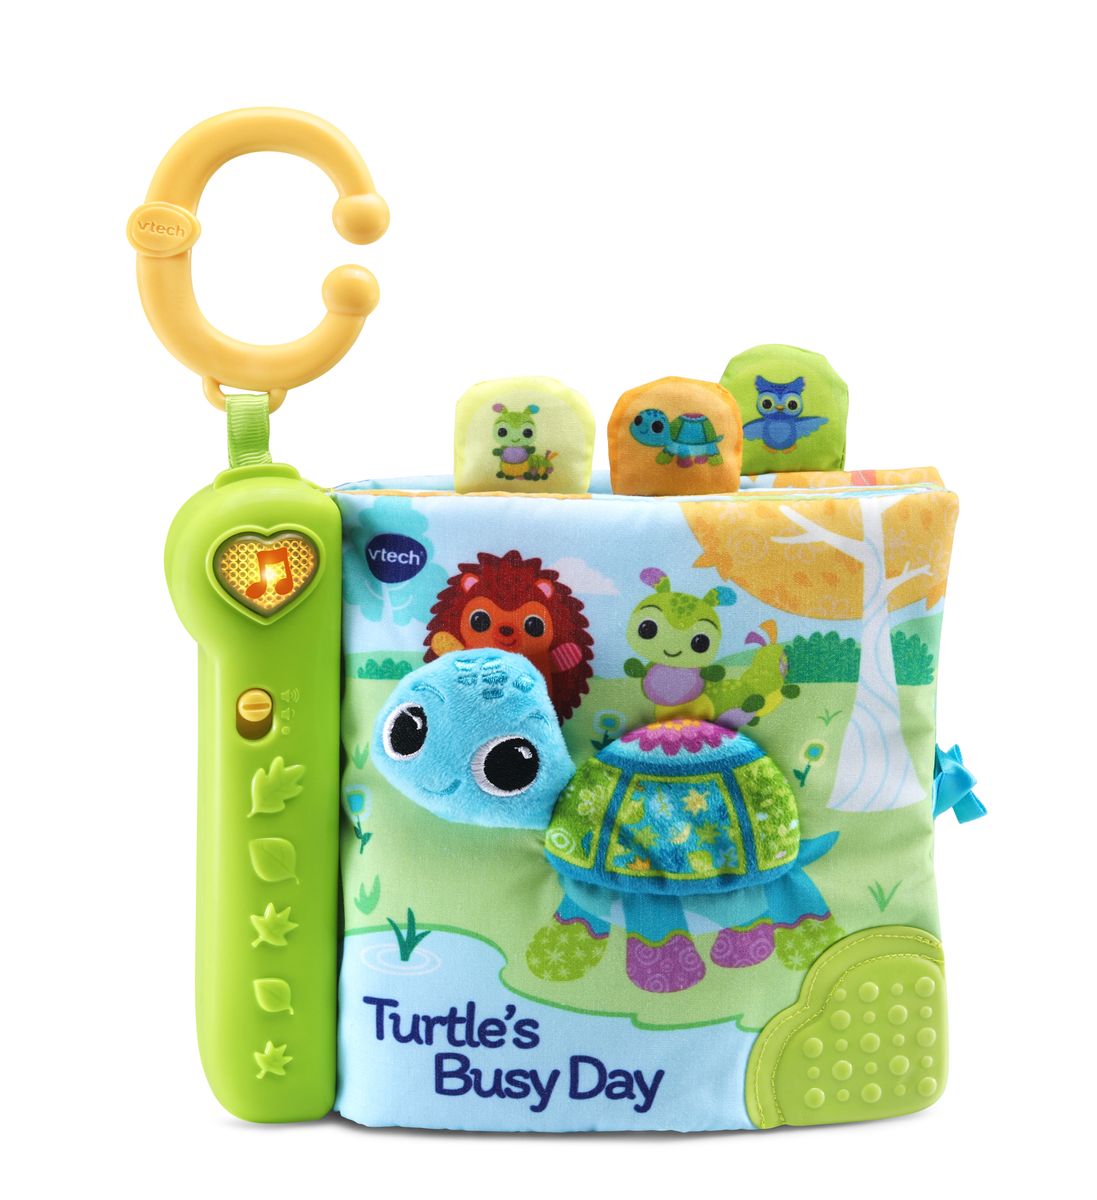 [RDY] [送料無料] VTech Turtle's Busy Day Soft Book 7つのインタラクティブなページ付き [楽天海外通販] | VTech Turtle's Busy Day Soft Book With 7 Interactive Pages